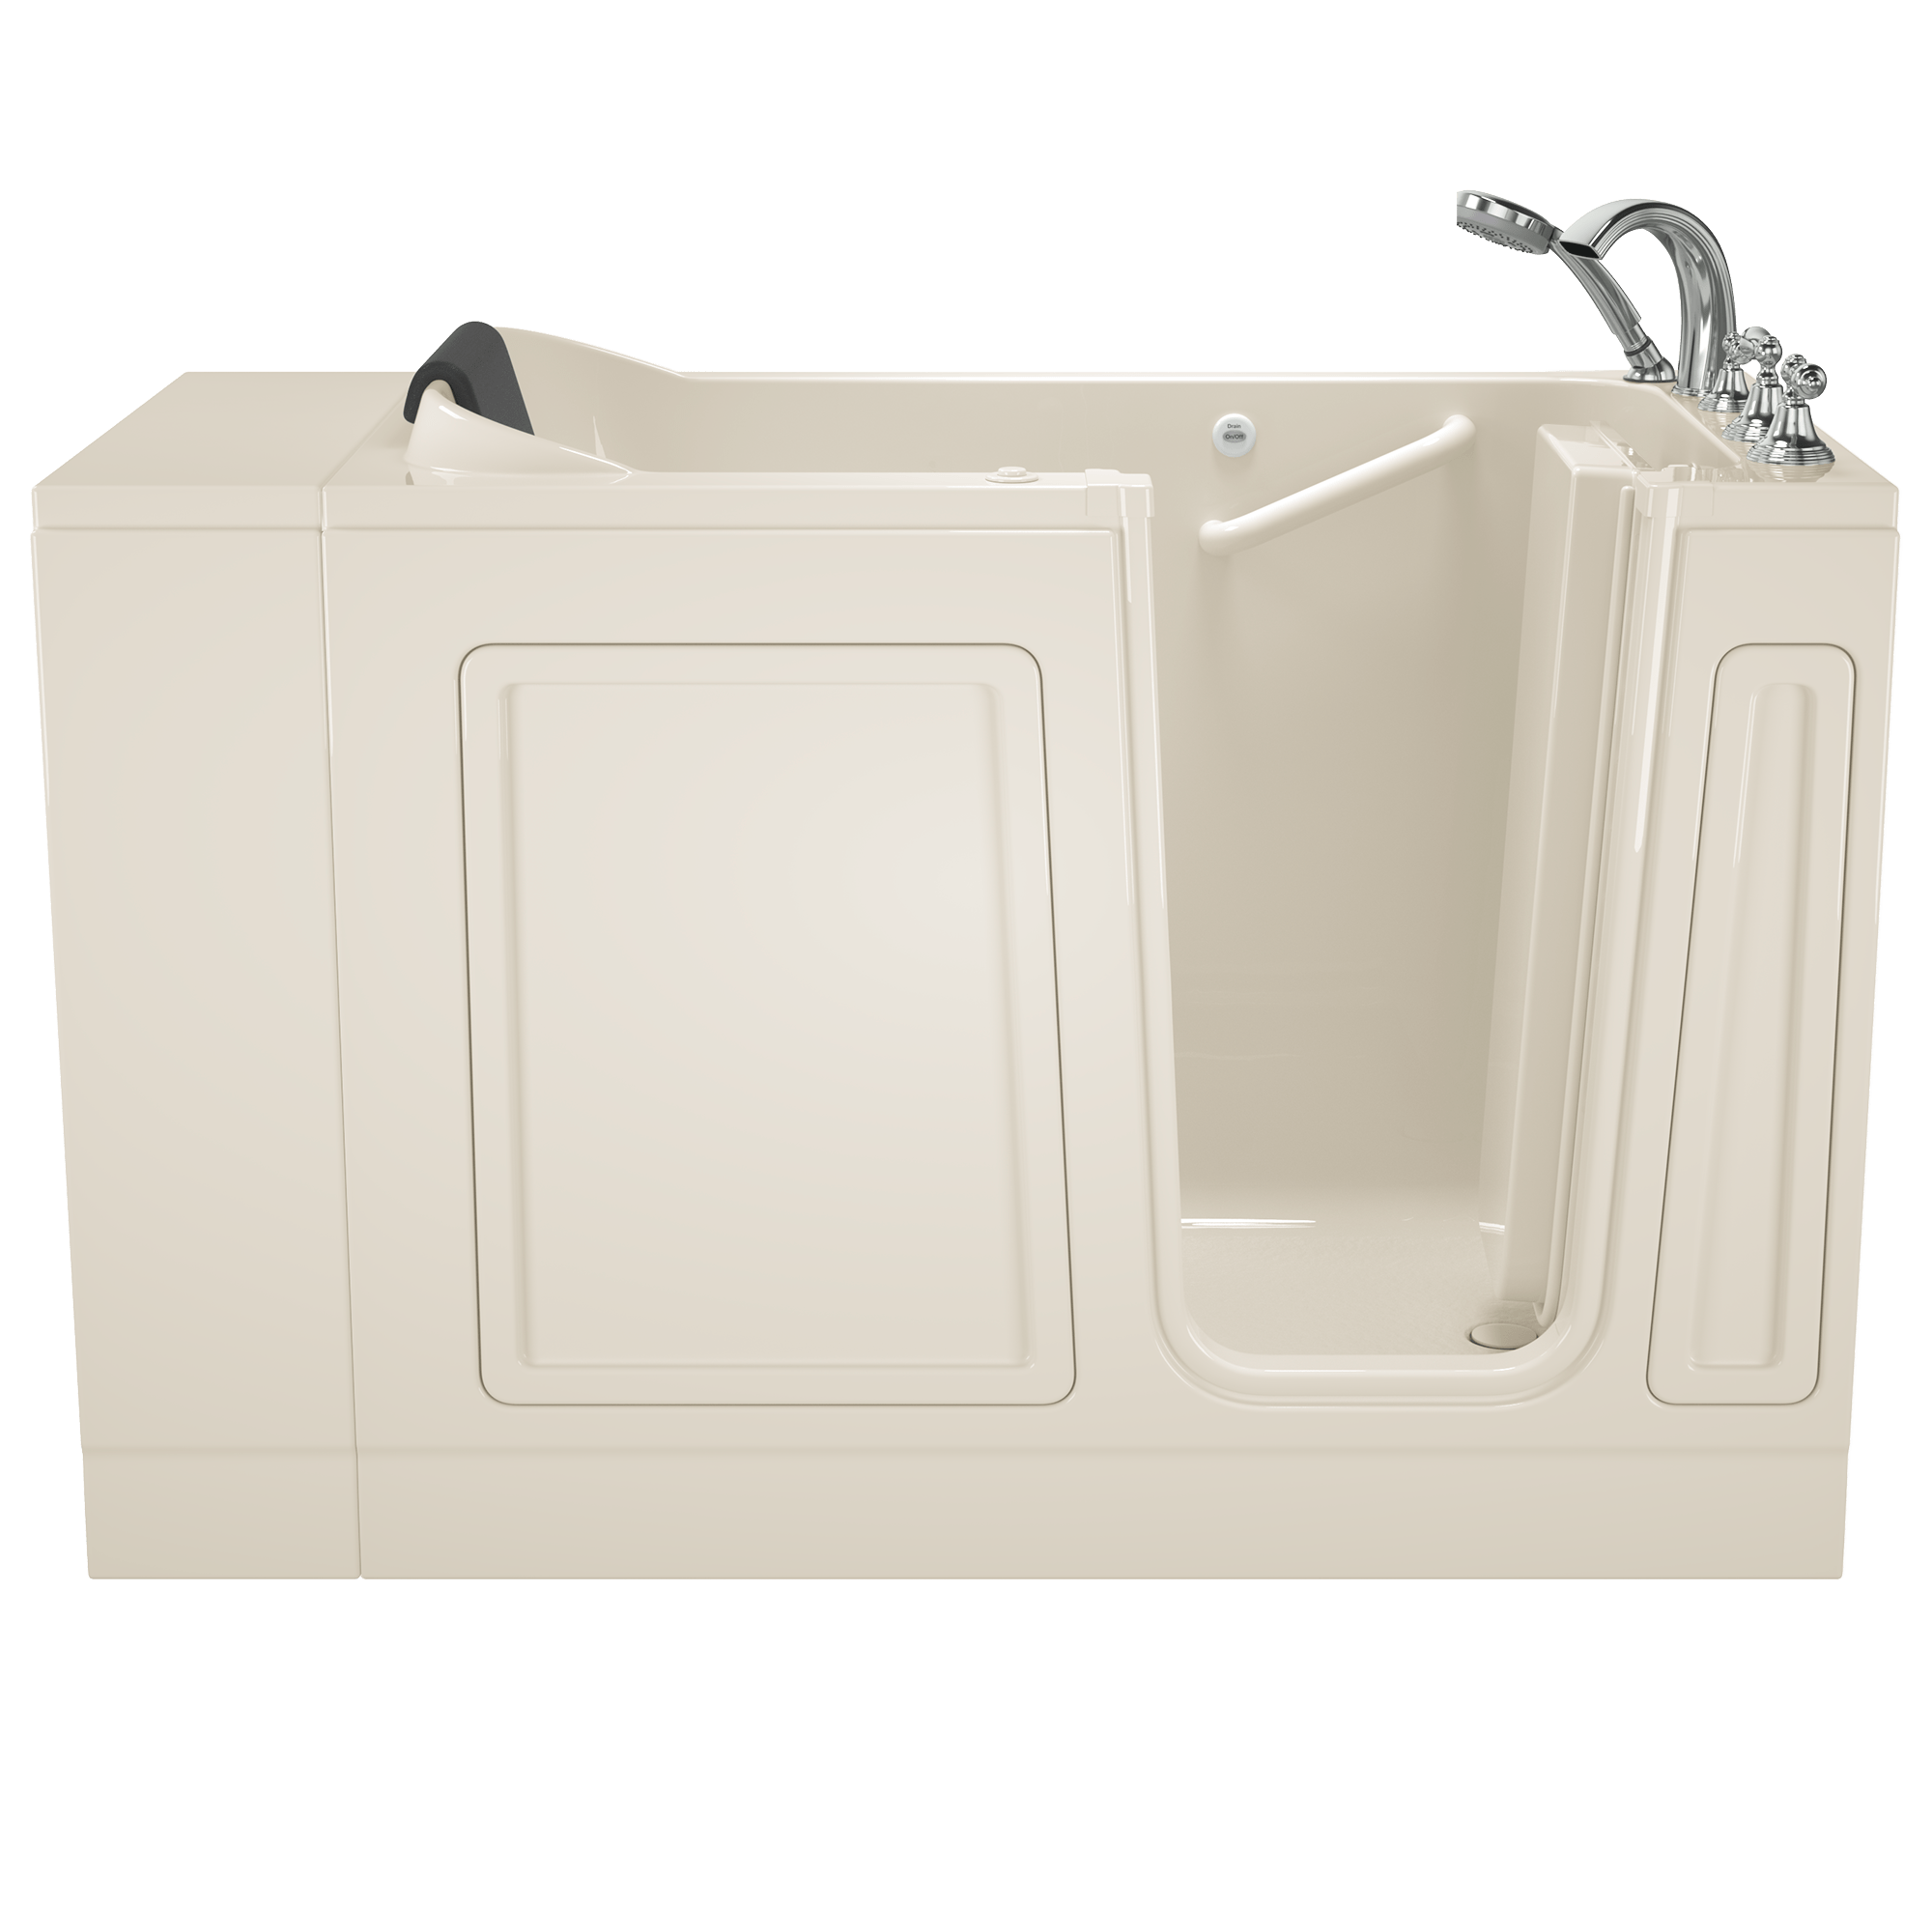 Acrylic Luxury Series 28 x 48-Inch Walk-in Tub With Air Spa System - Right-Hand Drain With Faucet